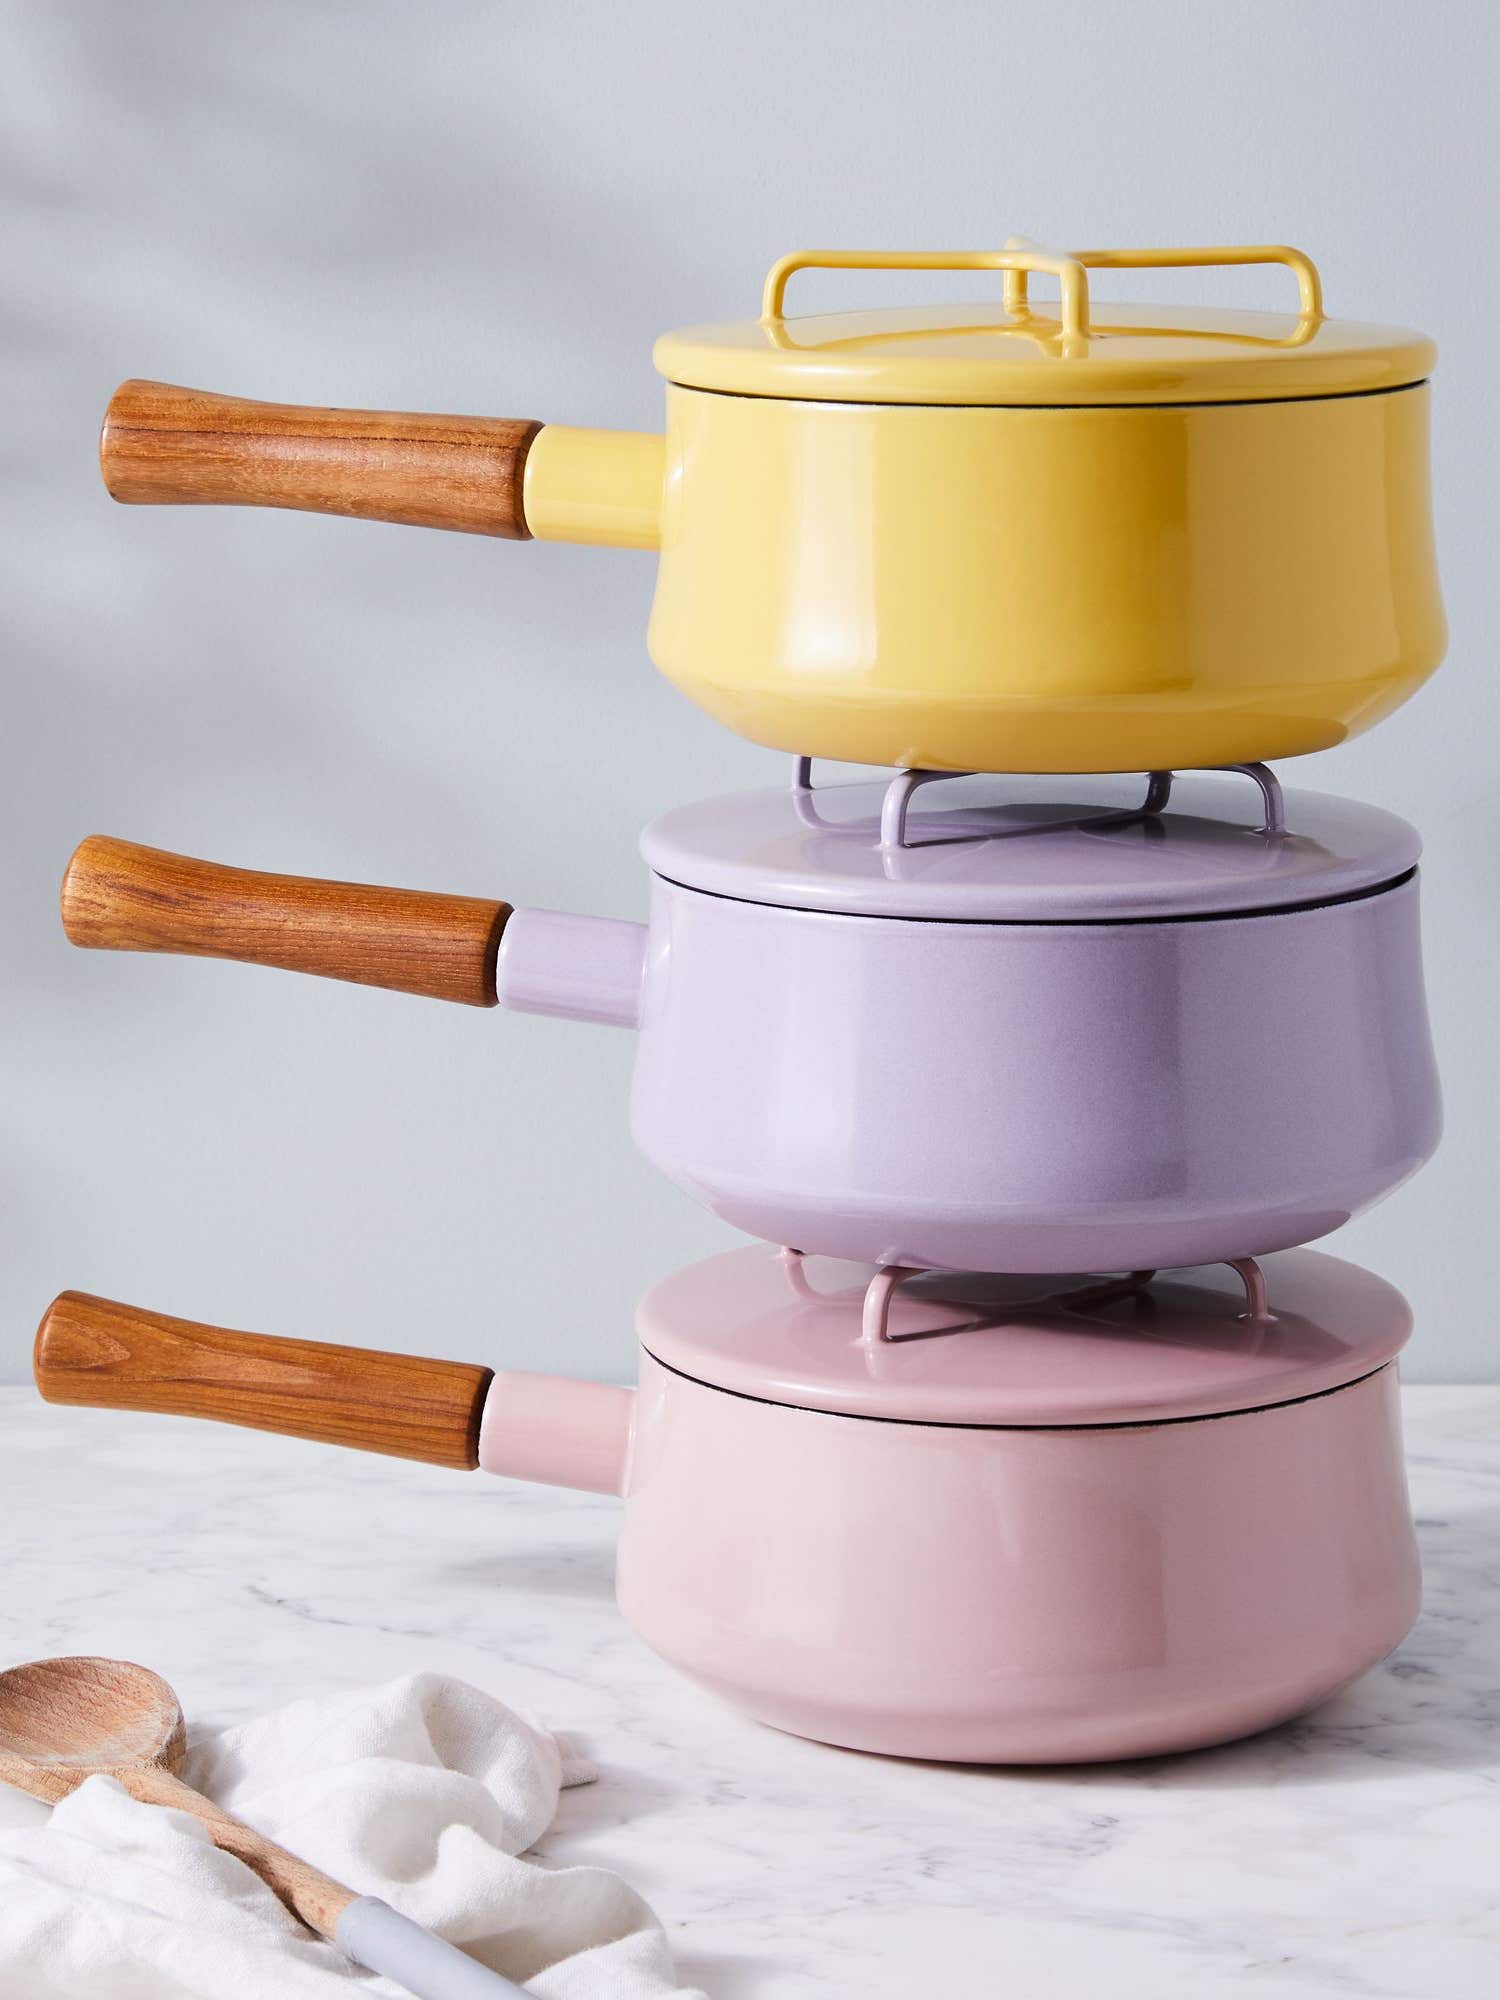 I Don’t Need a $60 Butter-Warming Pot (But I Want One Anyway)